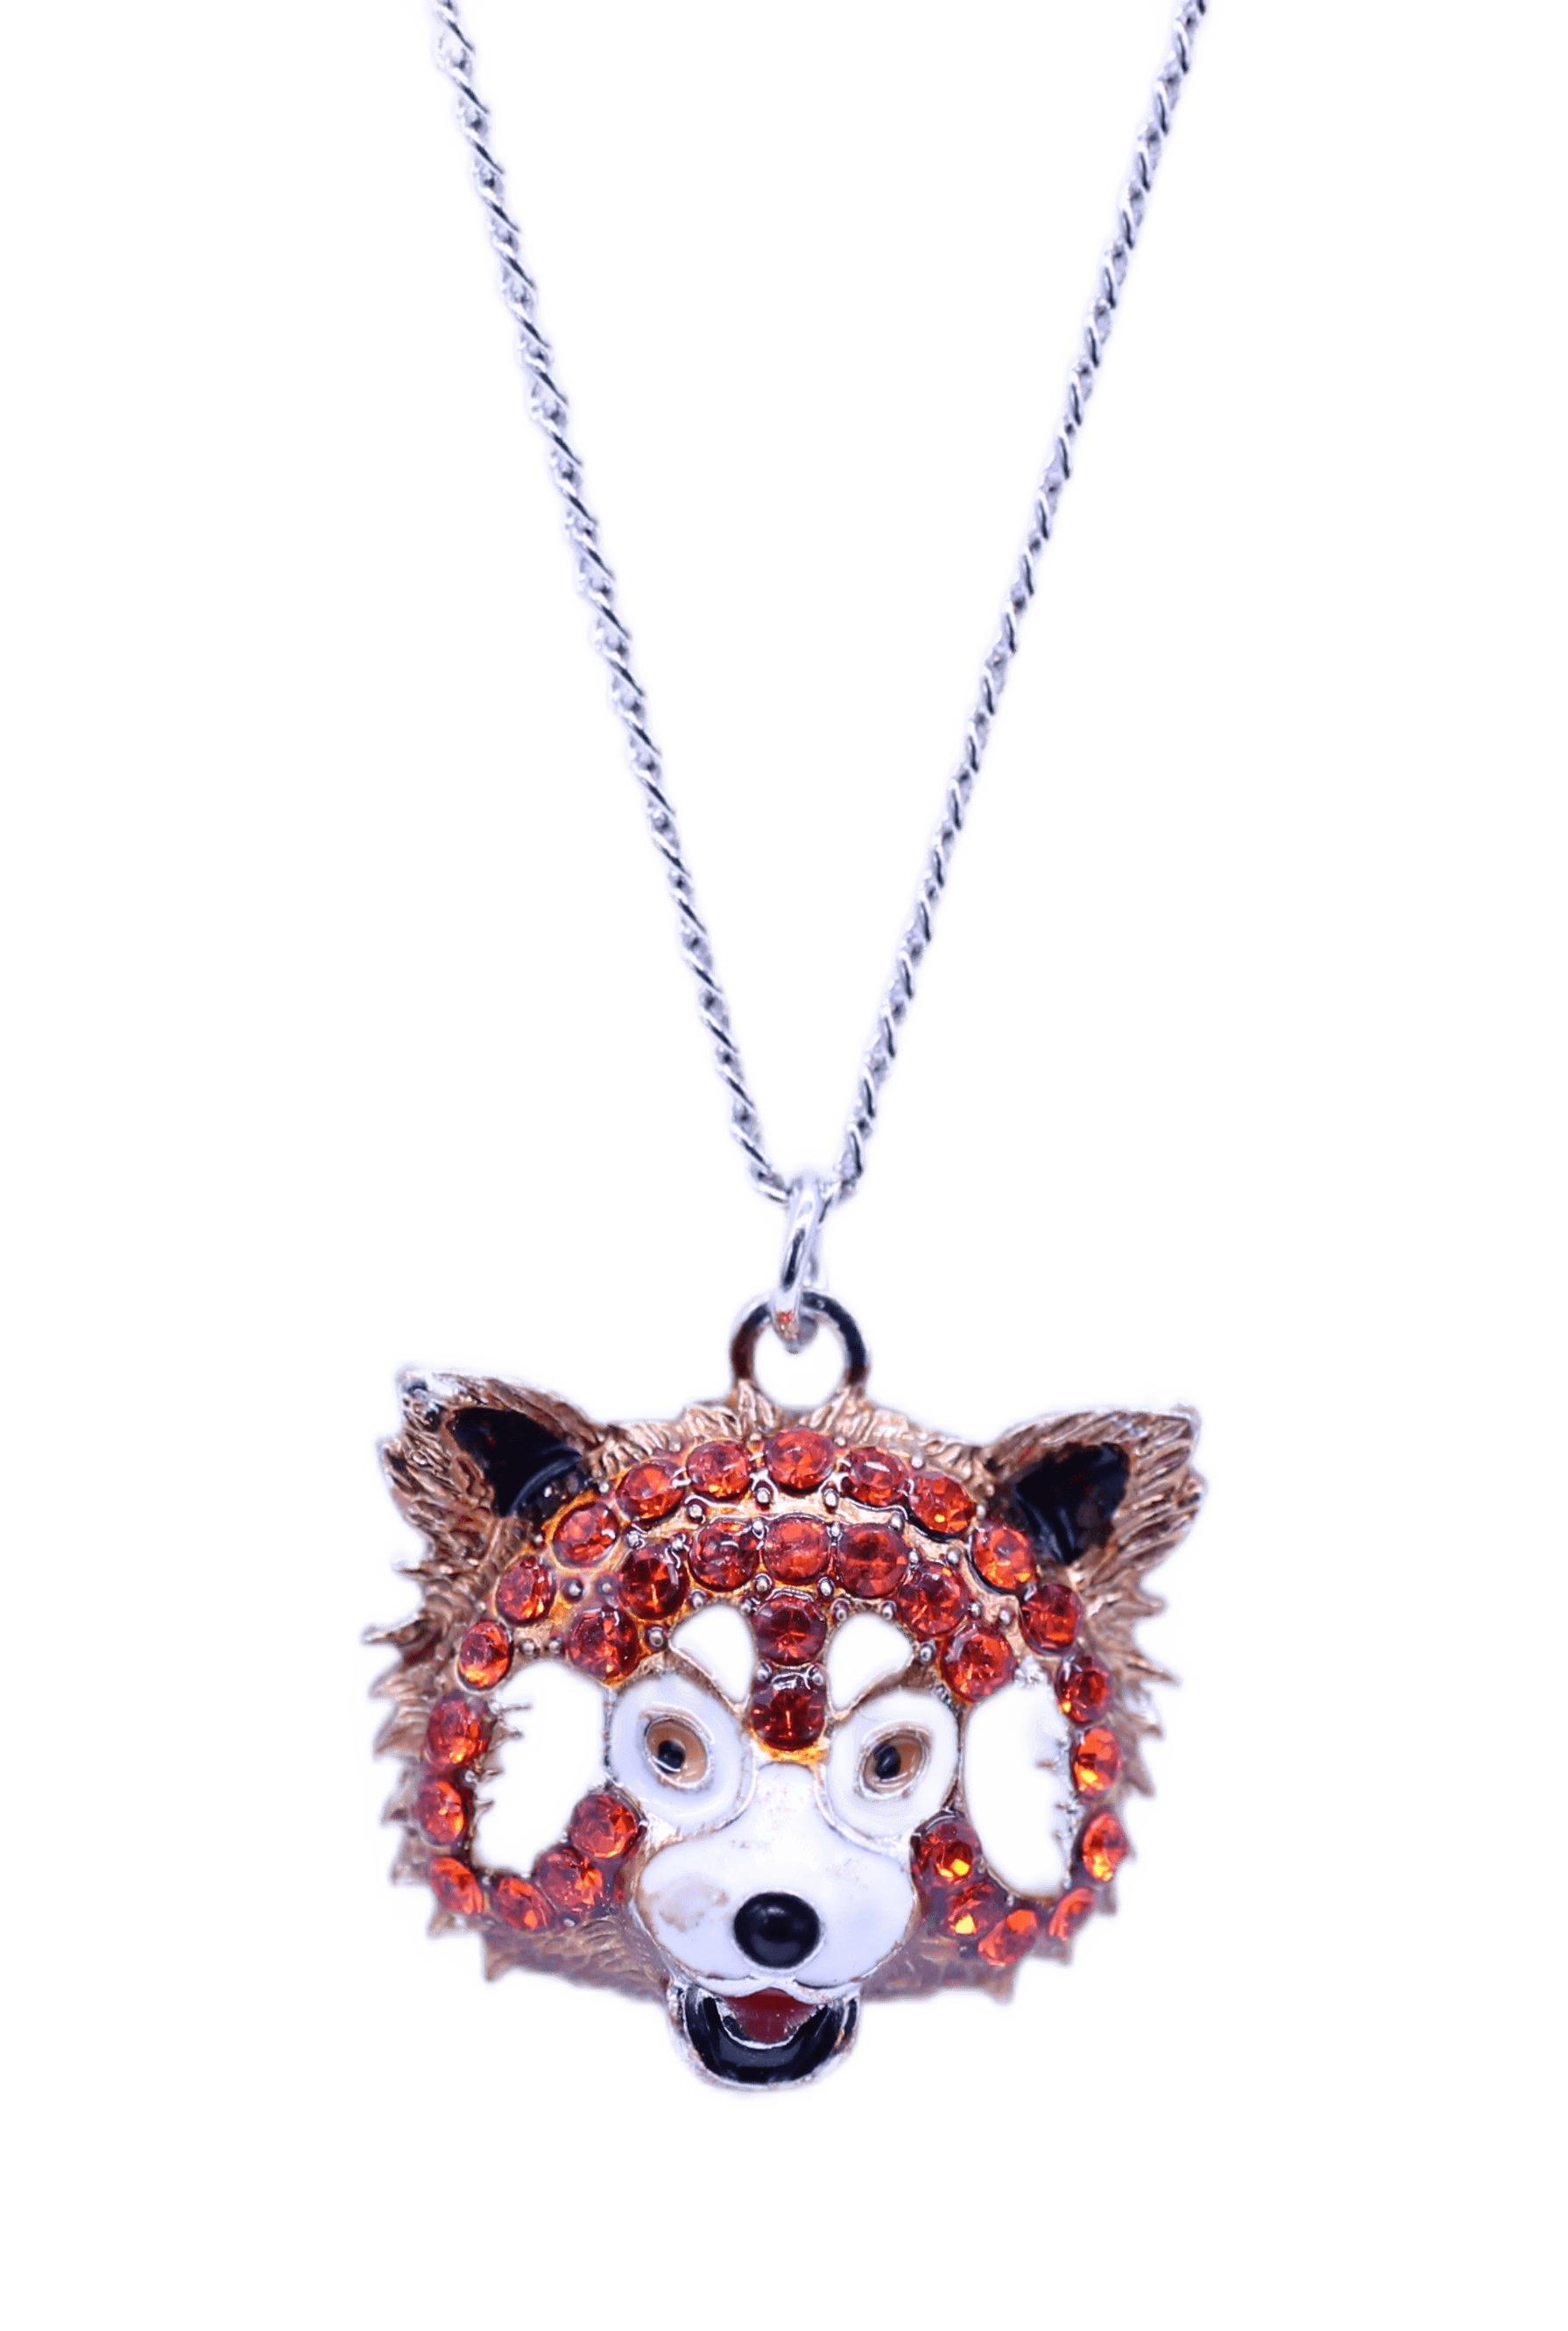 Red panda head necklace